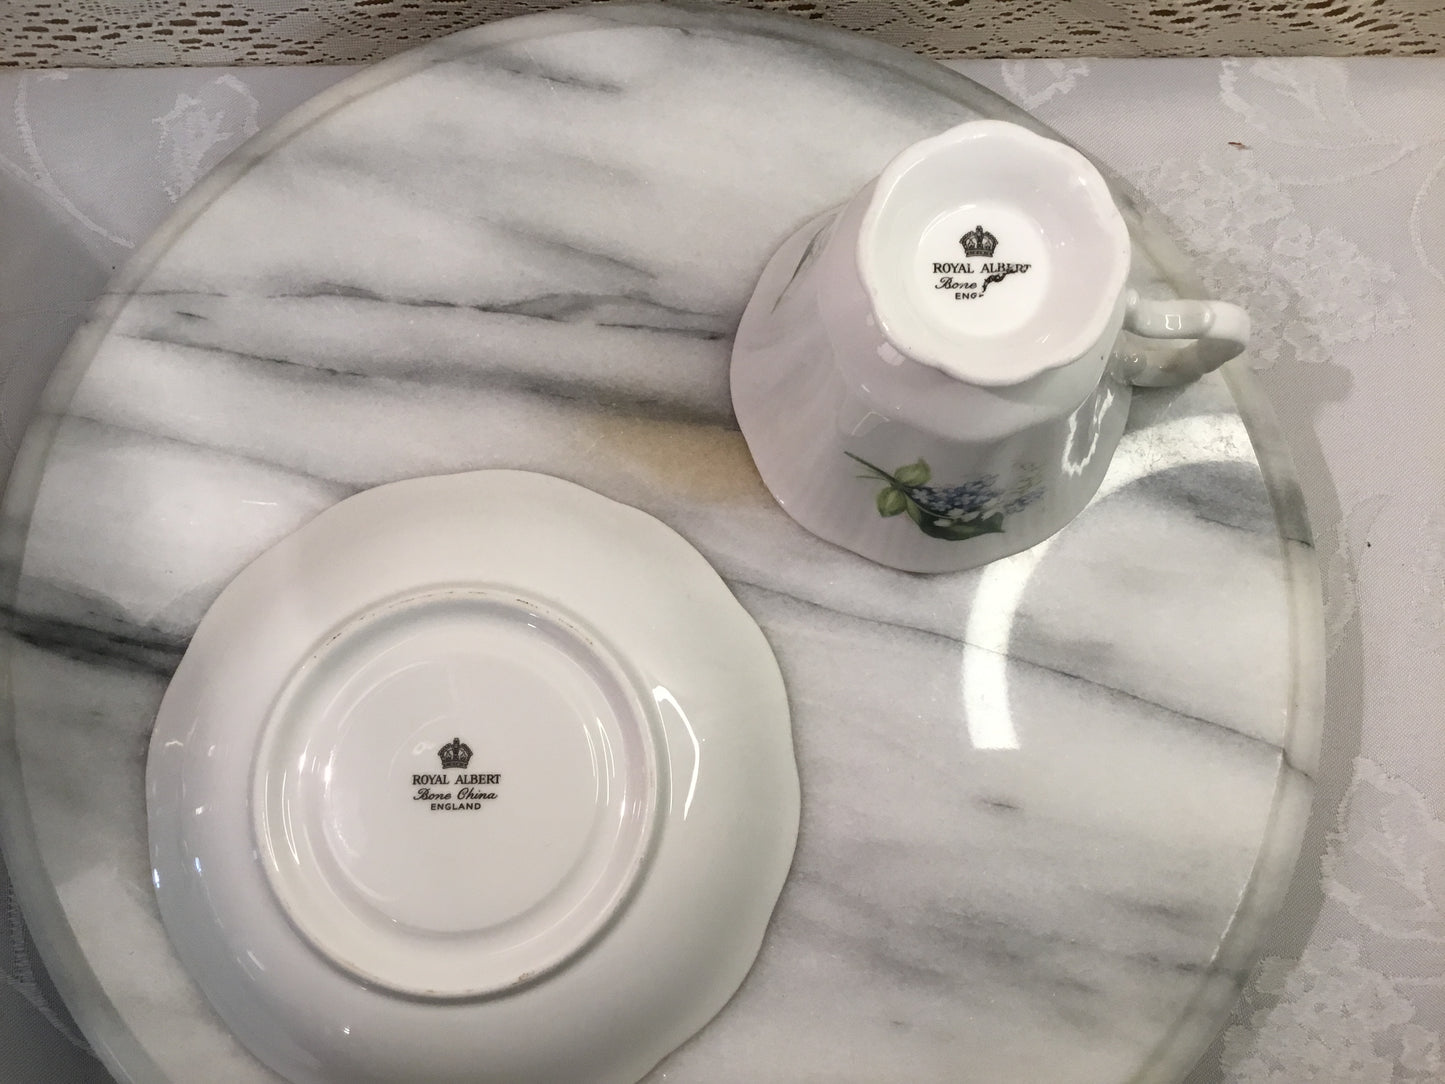 Royal Albert "Lily of the Valley" Cup and Saucer